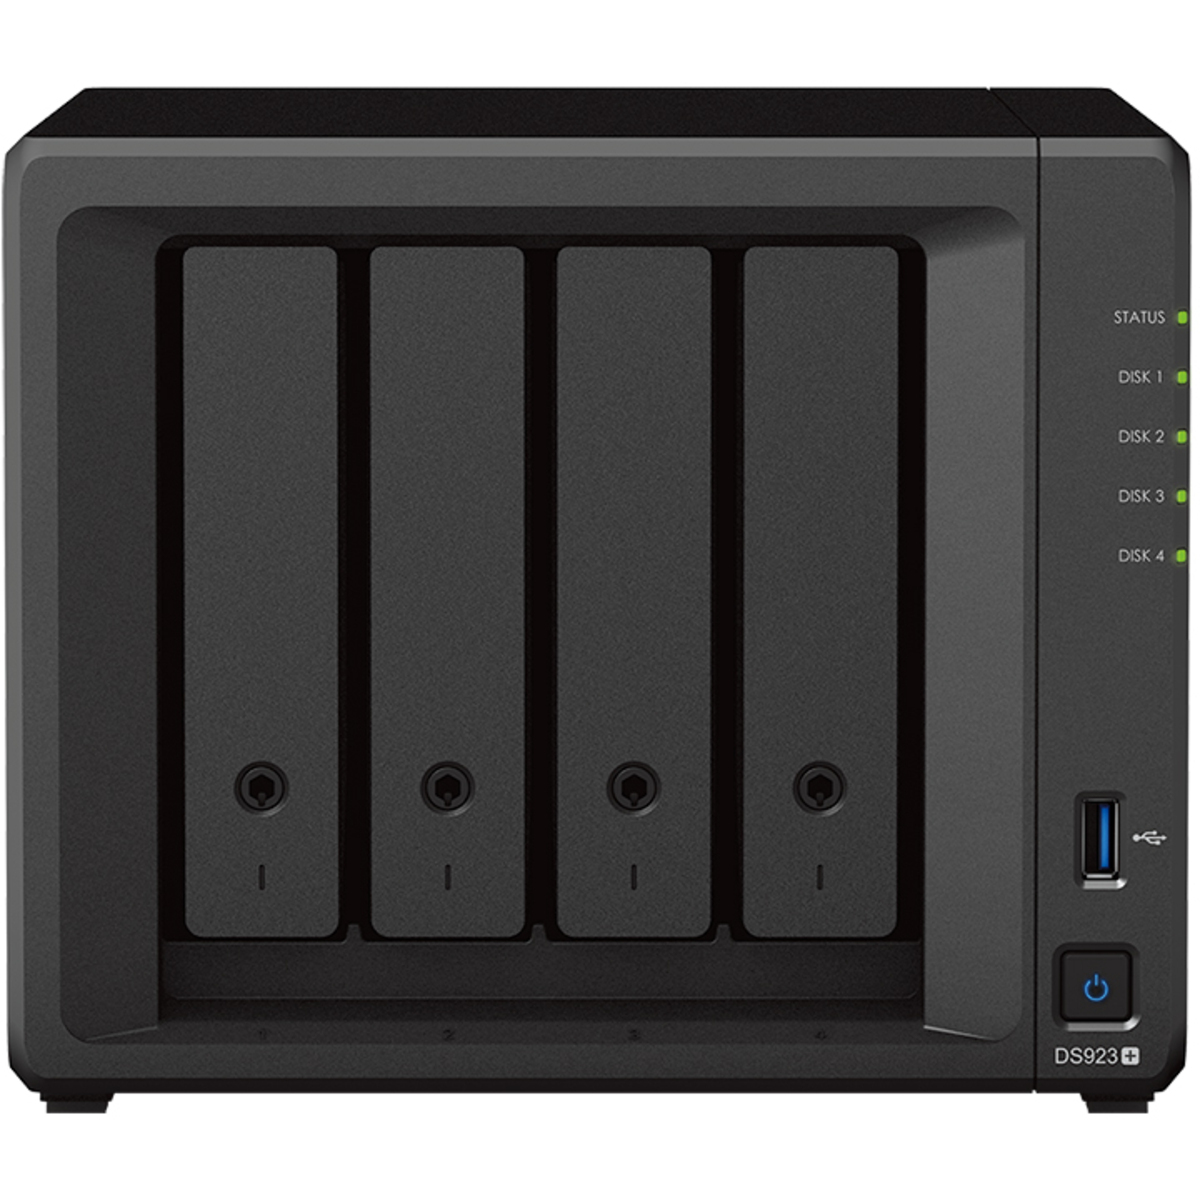 buy Synology DiskStation DS923+ 32tb Desktop NAS - Network Attached Storage Device 4x8000gb Samsung 870 QVO MZ-77Q8T0 2.5 560/530MB/s SATA 6Gb/s SSD CONSUMER Class Drives Installed - Burn-In Tested - FREE RAM UPGRADE - nas headquarters buy network attached storage server device das new raid-5 free shipping simply usa christmas holiday black friday cyber monday week sale happening now! DiskStation DS923+